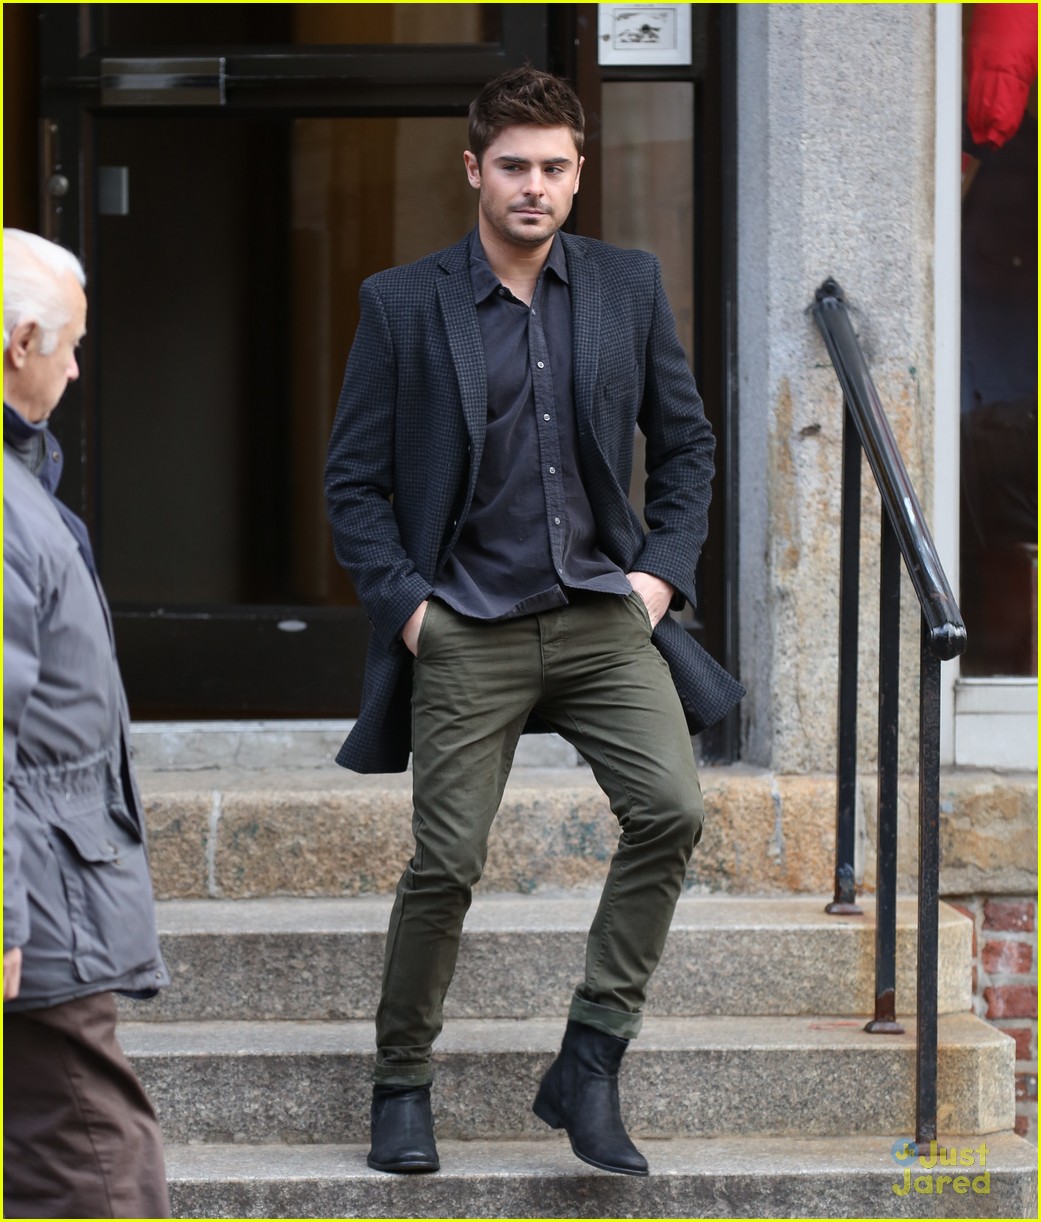 Zac Efron: 'Are We Officially Dating?' in New York City | Photo 519283 ...